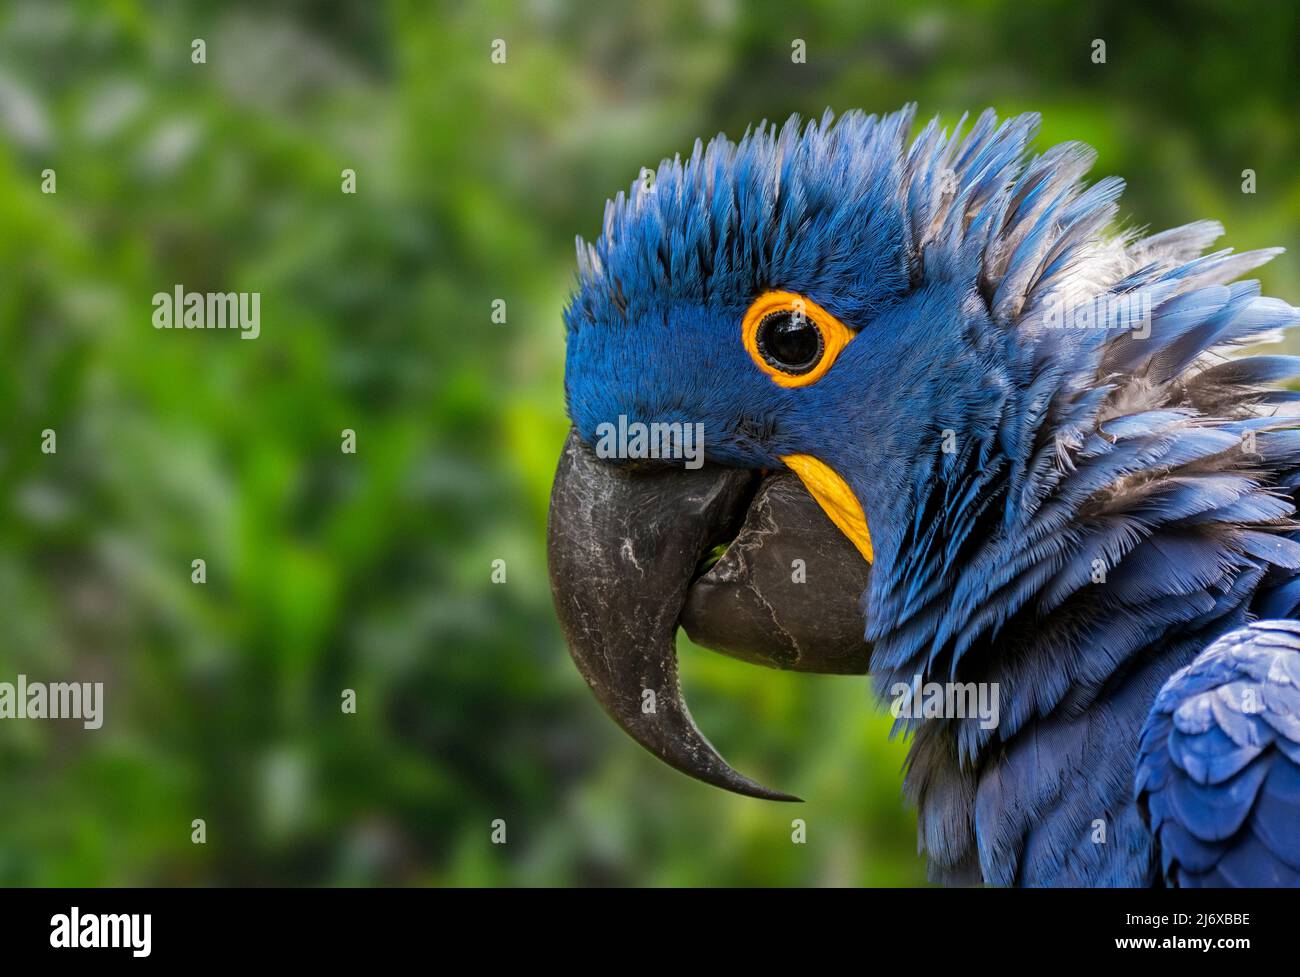 Hyacinth macaw / hyacinthine macaw (Anodorhynchus hyacinthinus) parrot native to central and eastern South America Stock Photo